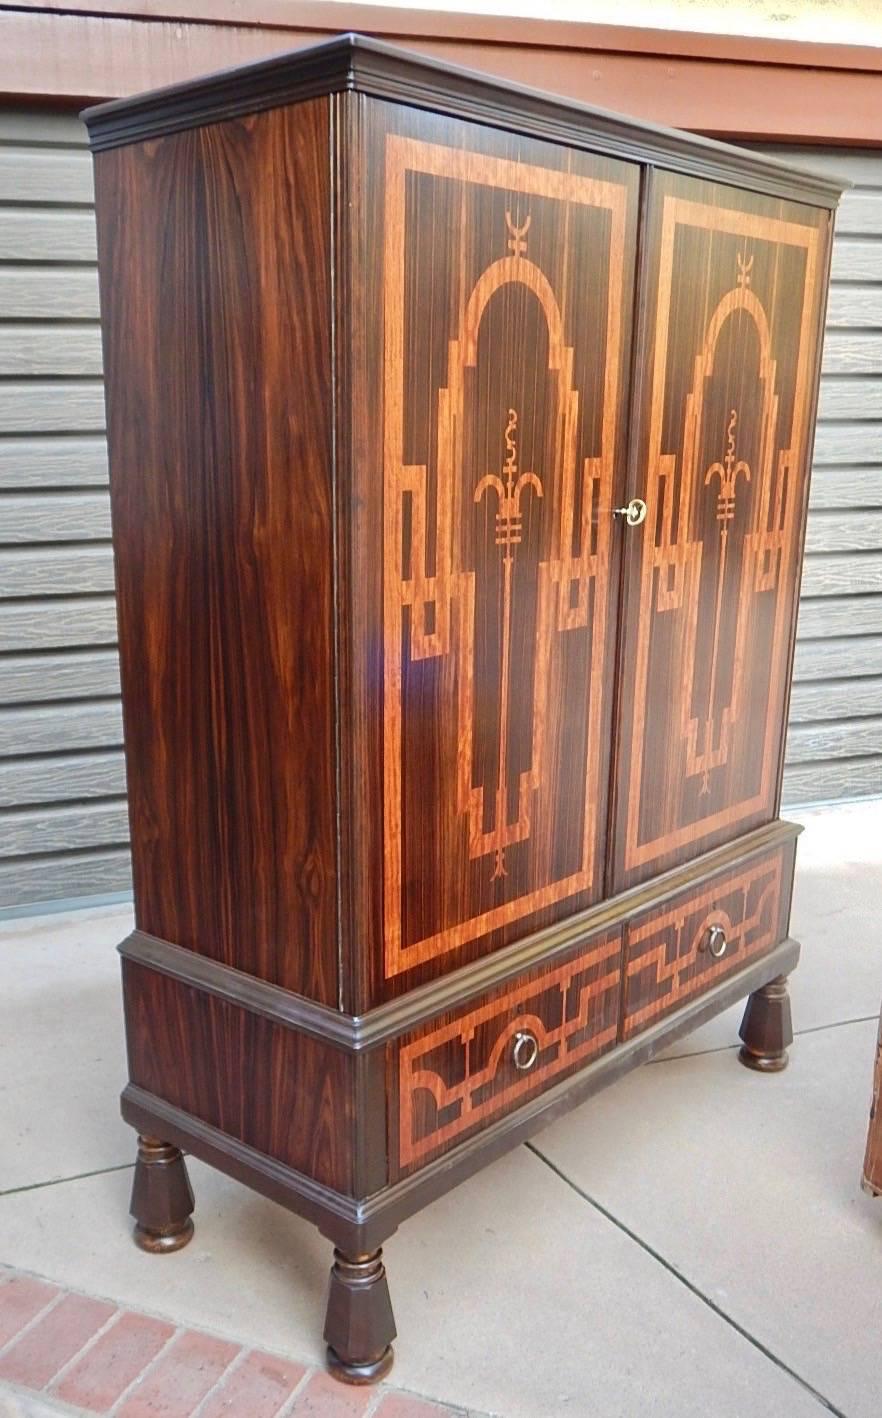 A very rare Swedish Art Deco storage cabinet rendered in zebra and rosewood. With geometric inlay. There are two original shelves which are removable and adjustable-and not shown in the photos. There are two storage drawers at the bottom of the